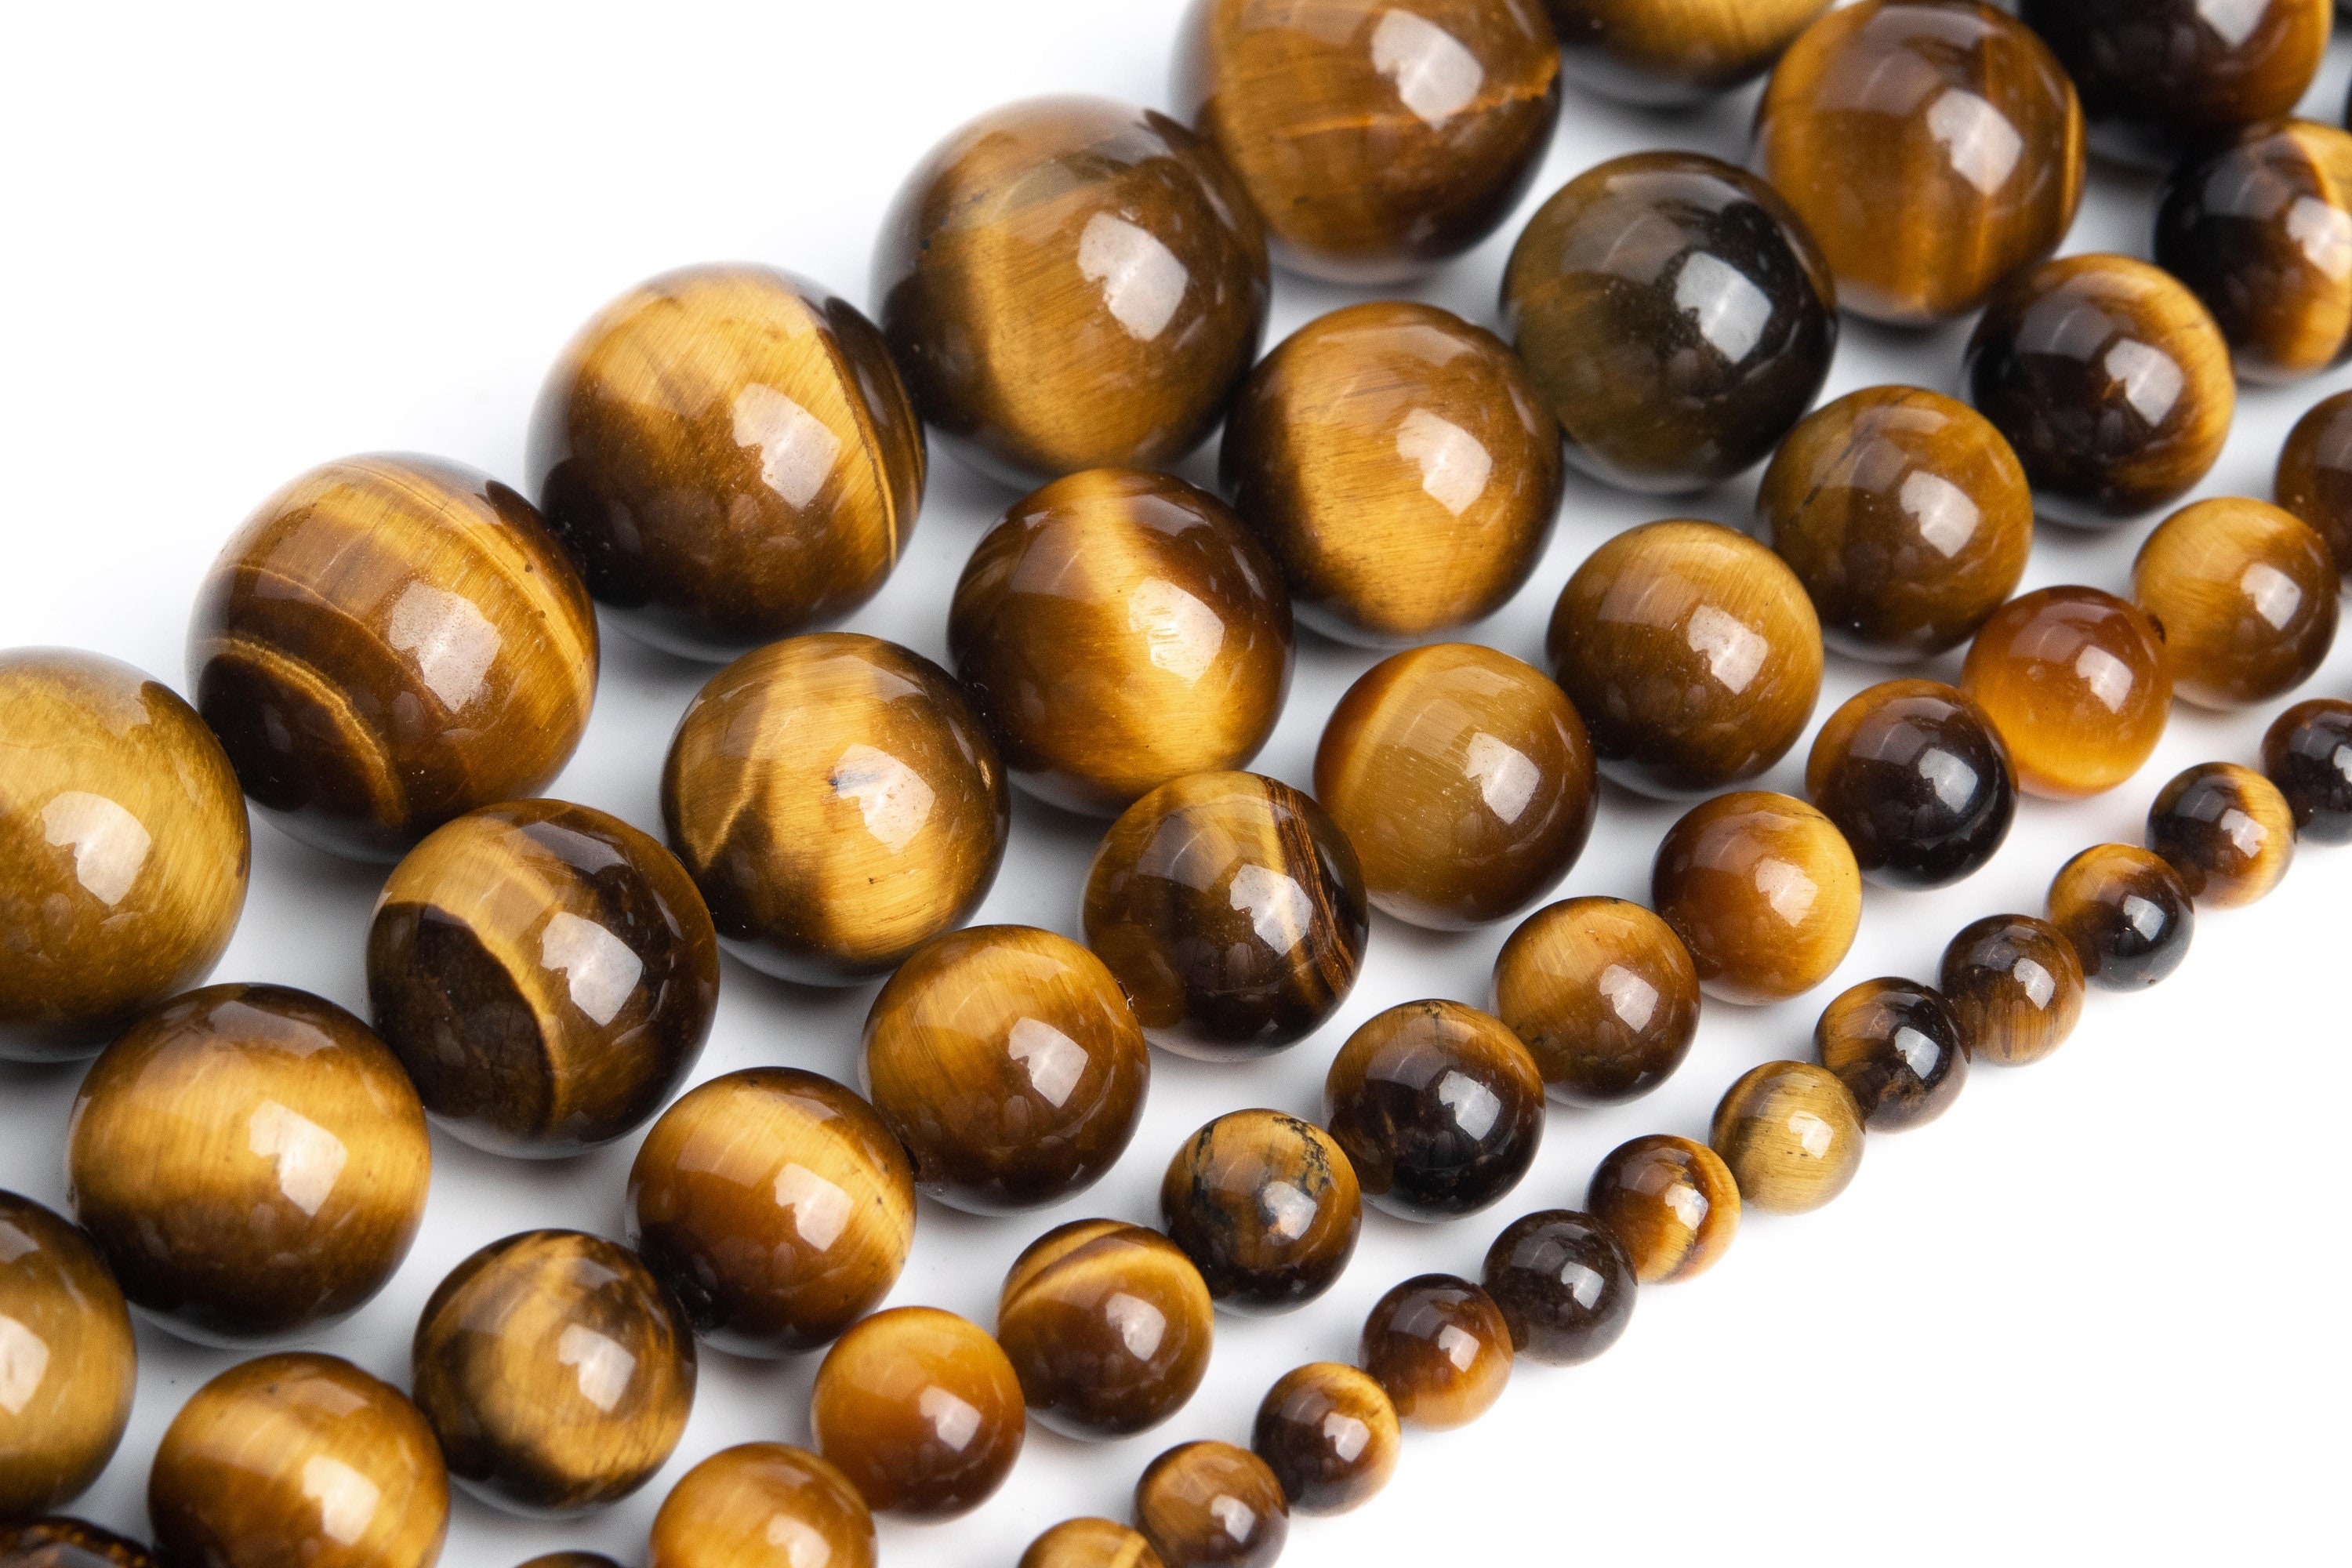 Sweet Little Tiny Tiger Eye Round Beads 4mm / Tigers Eye Gemstone Beads  Small Order Beads 